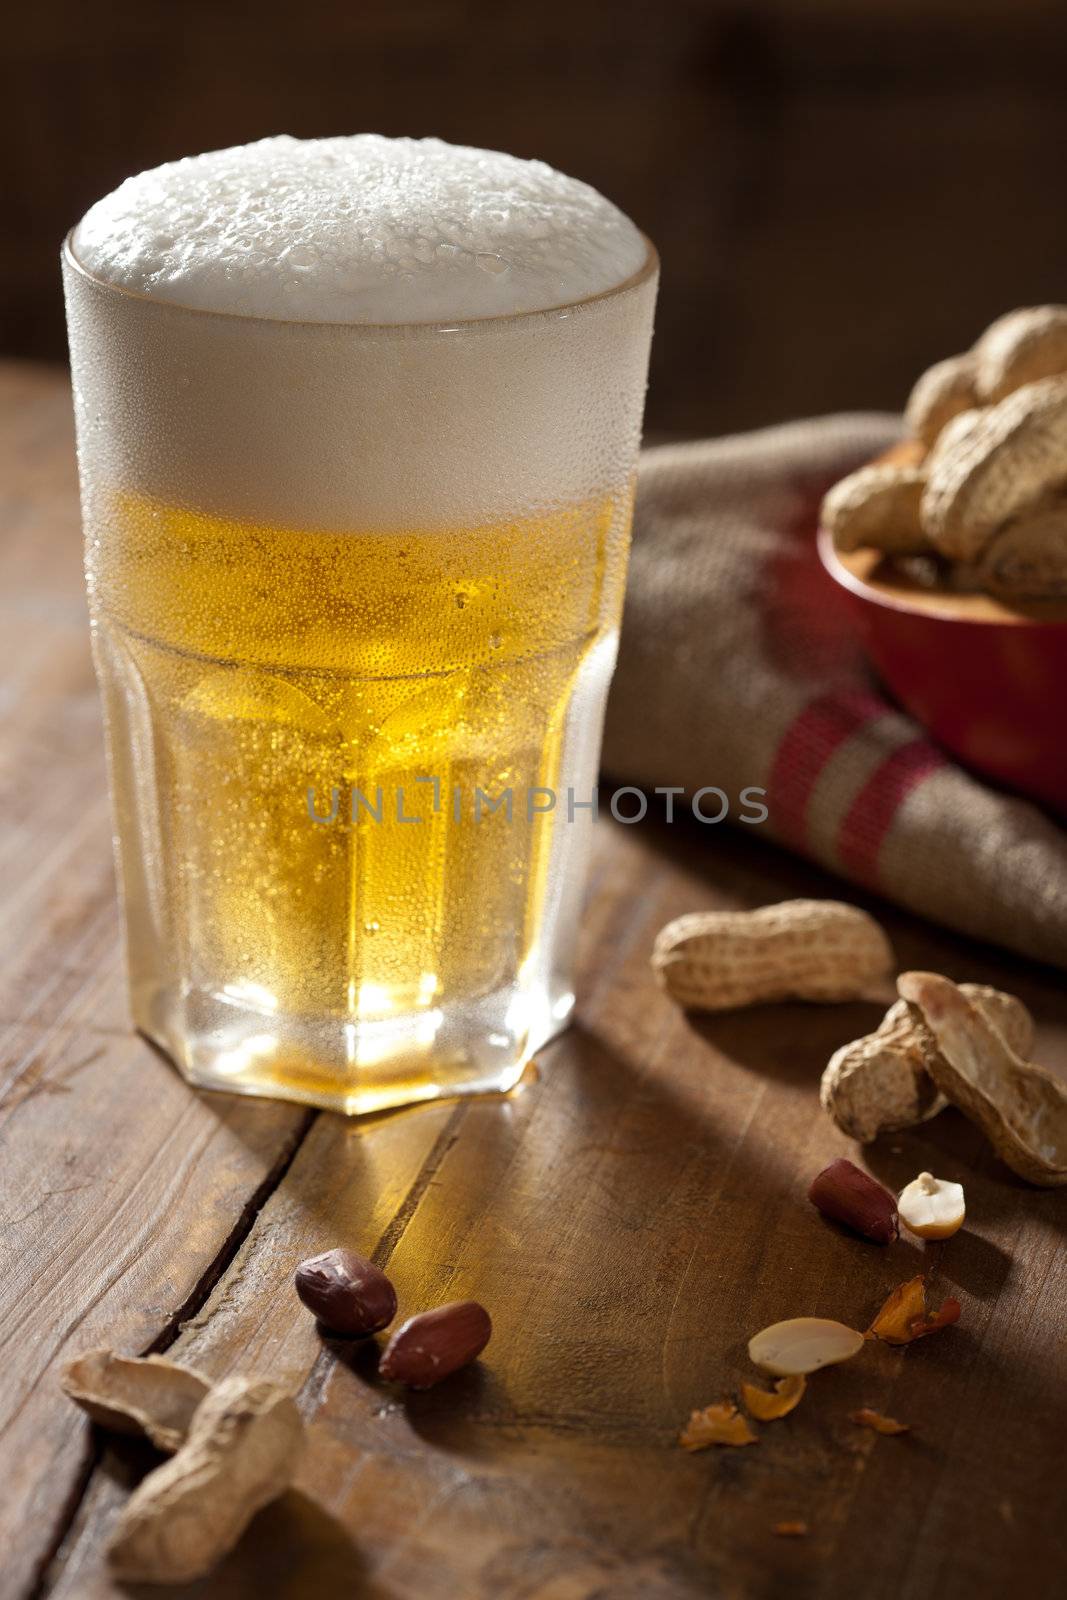 Cool glass of beer with a snack next to it